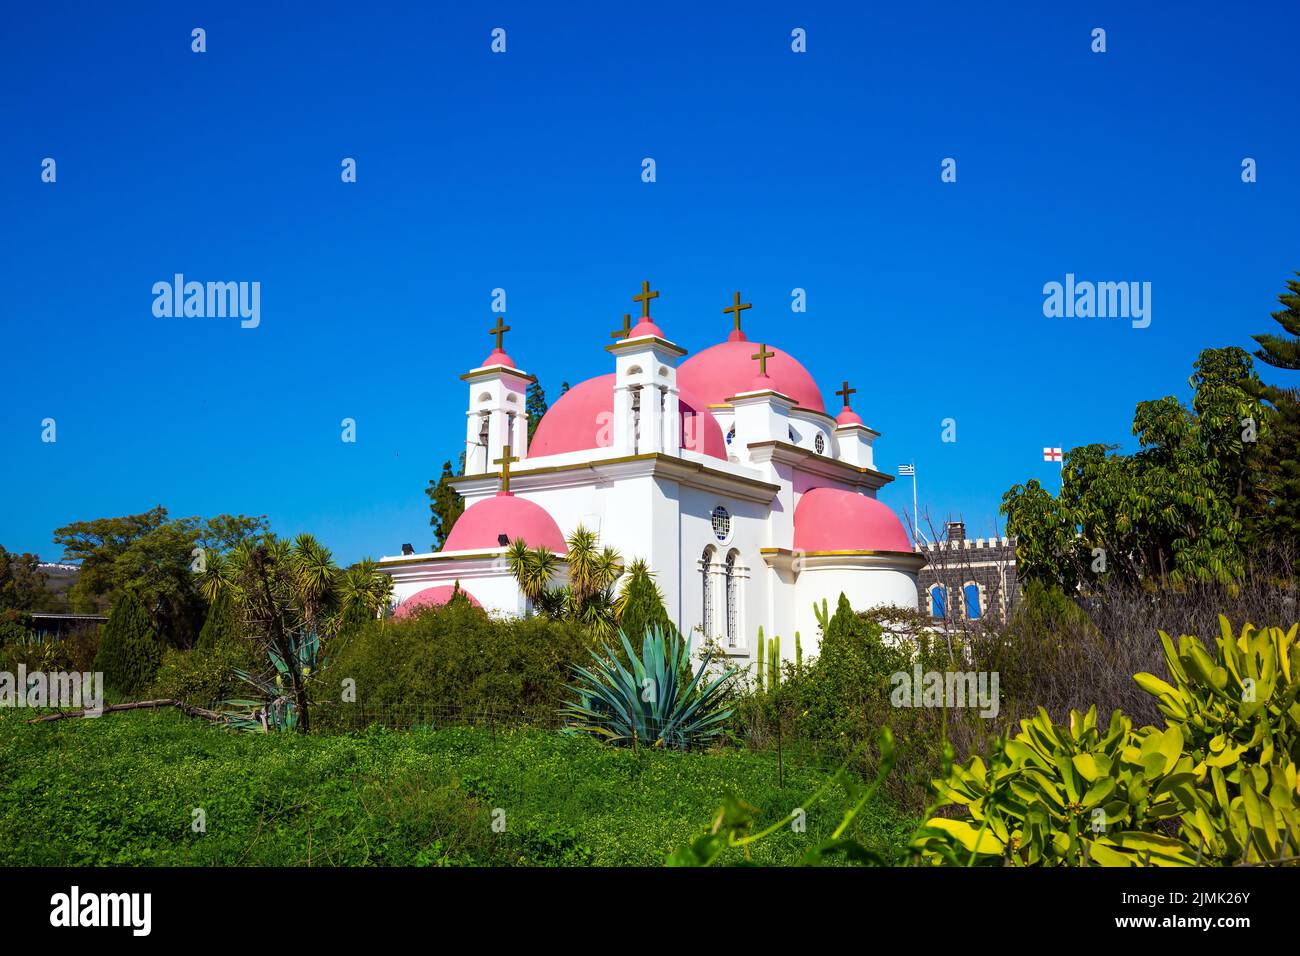 Church with pink domes and golden crosses Stock Photo